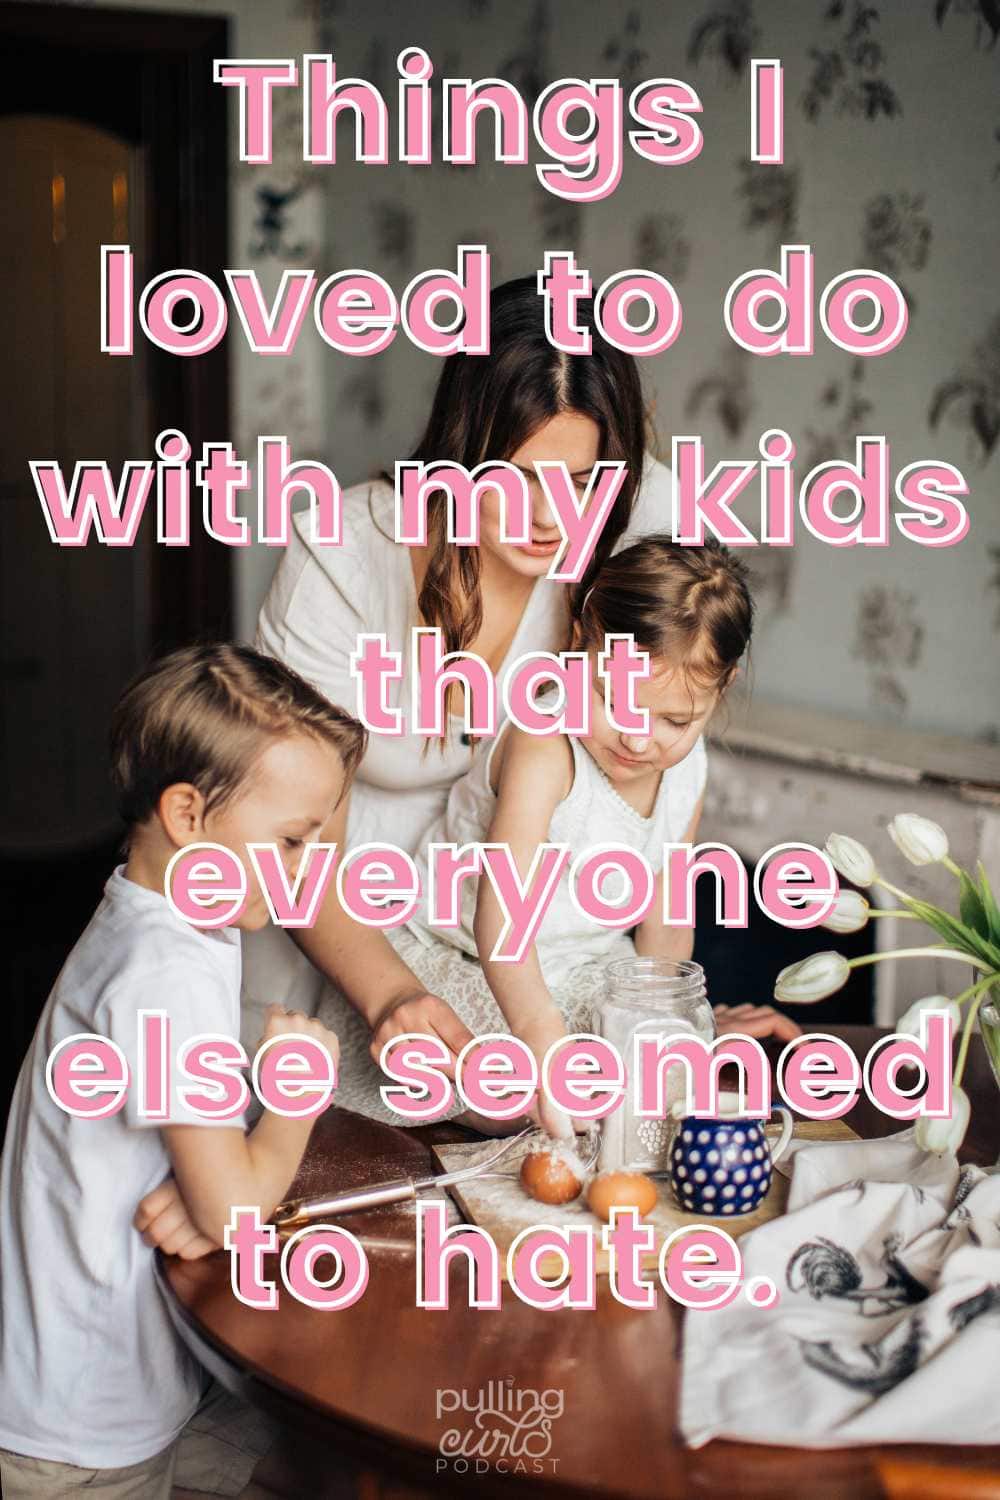 There are things that I loved doing that I felt like other parents hated. This episode is meant to help you play to your strengths! via @pullingcurls